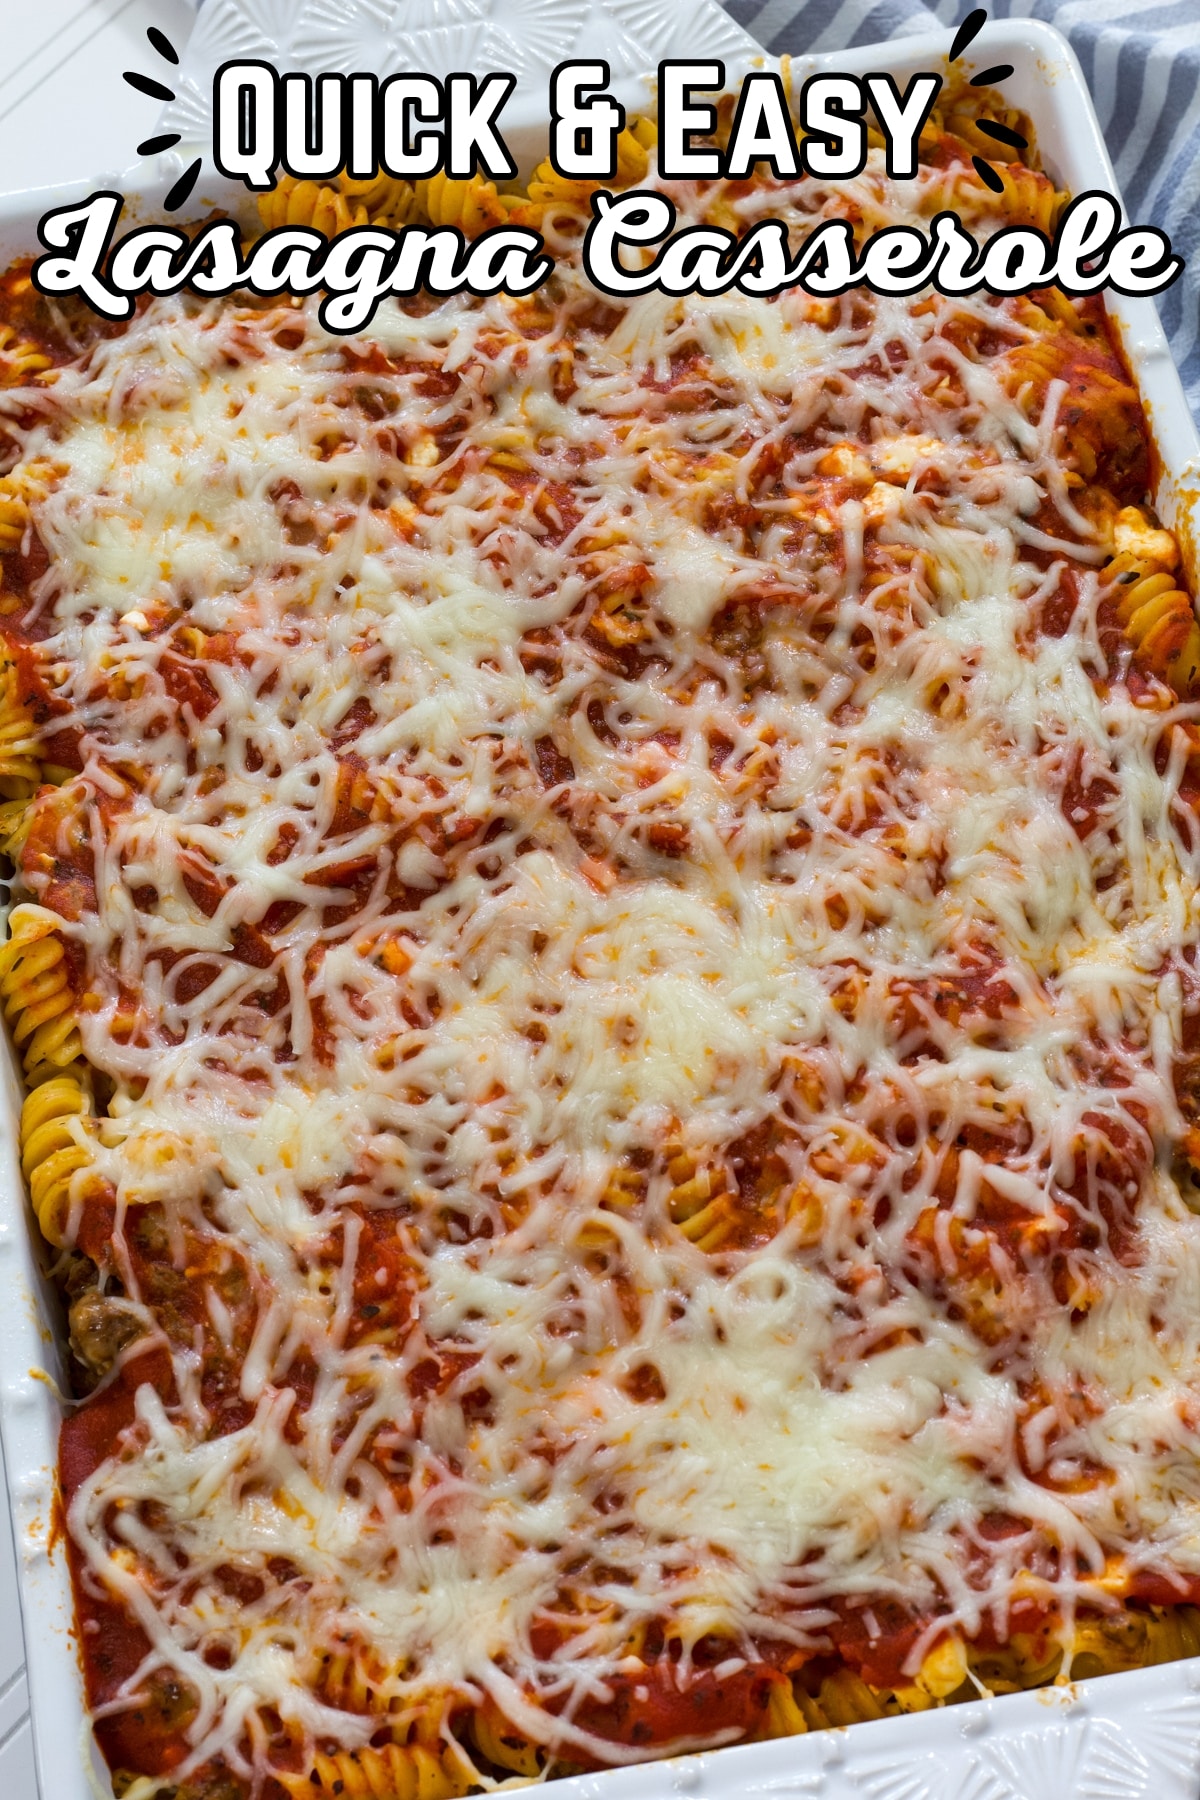 Quick and easy homemade lasagna casserole recipe - savor the cheesy goodness in no time. A delicious twist on a classic favorite for effortless comfort. We have swapped the cottage ricotta cheese in traditional lasagne with cottage cheese. Our version is made with tender pasta, ground beef, spices, jar spaghetti sauce, and three kinds of cheese. via @mindyscookingobsession